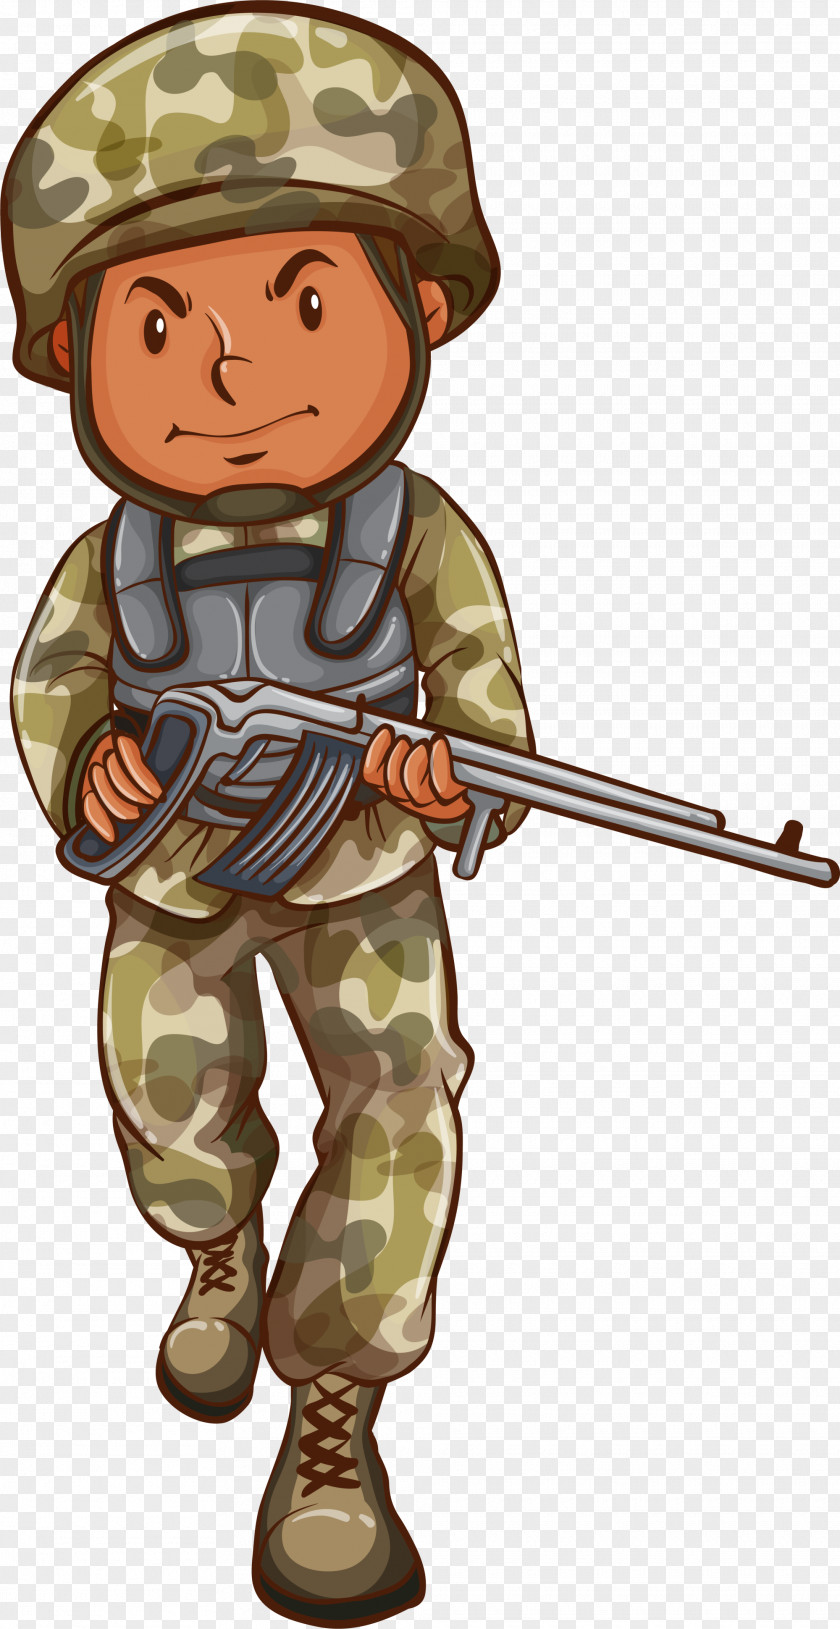 Green Cartoon Soldiers Soldier Drawing Illustration PNG